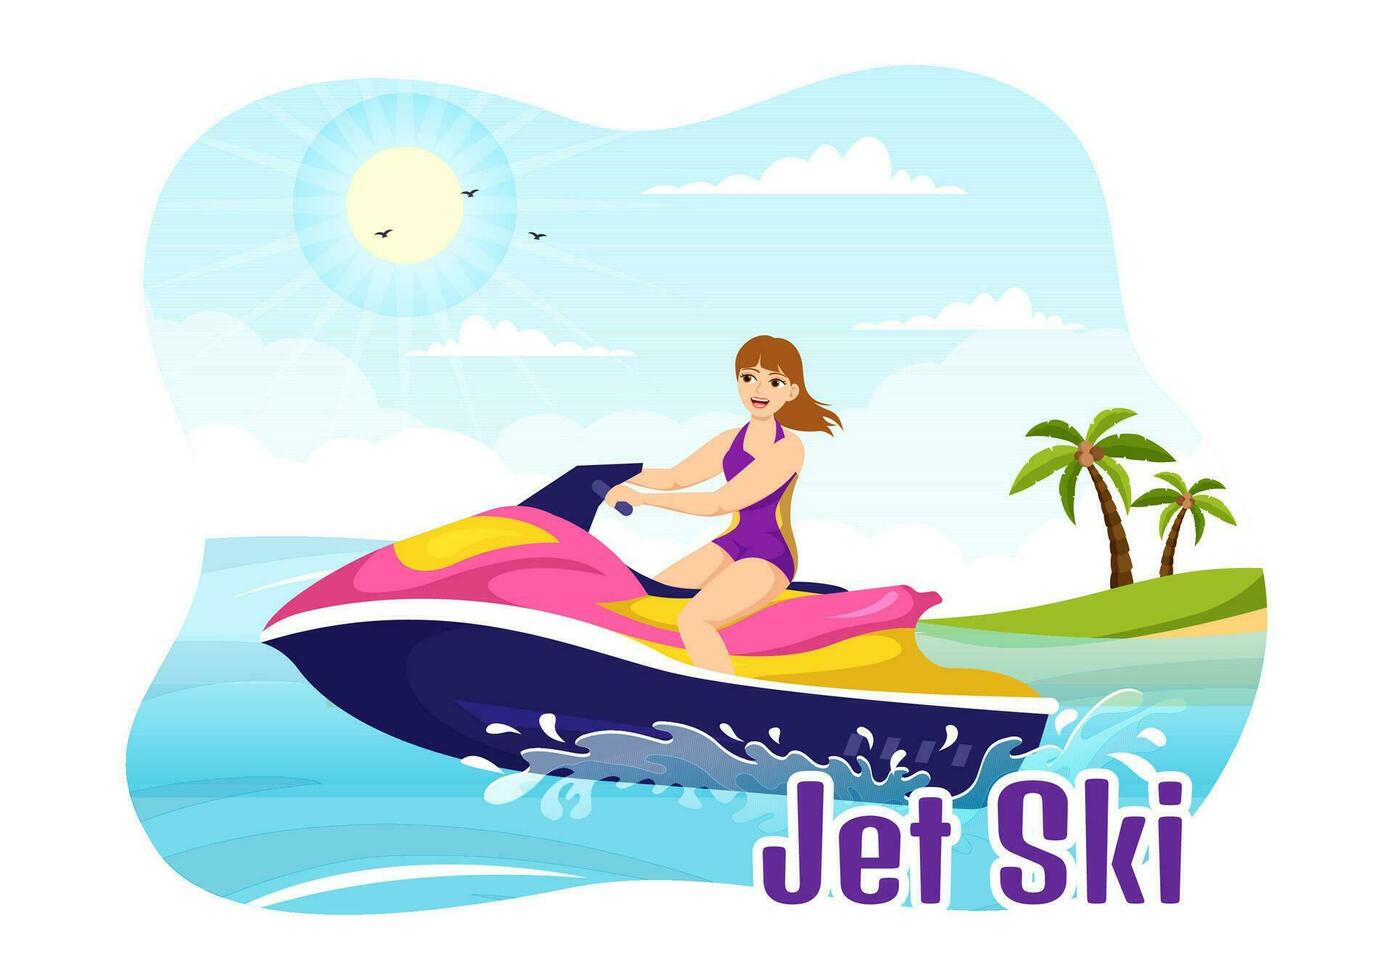 People Ride Jet Ski Vector Illustration Summer Vacation Recreation, Extreme Water Sports and Resort Beach Activity in Hand Drawn Flat Cartoon Template